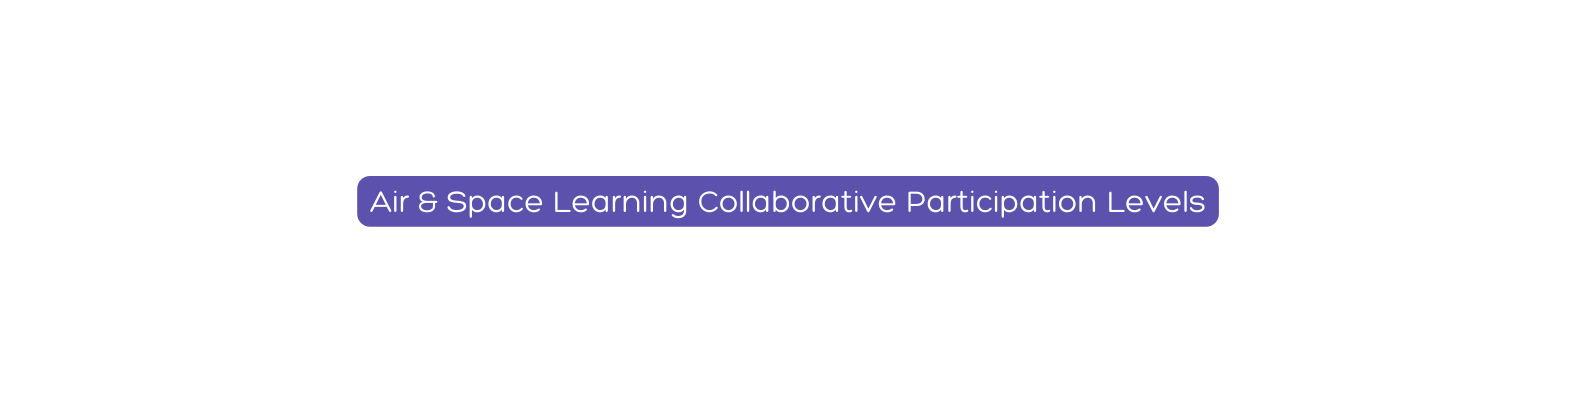 Air Space Learning Collaborative Participation Levels